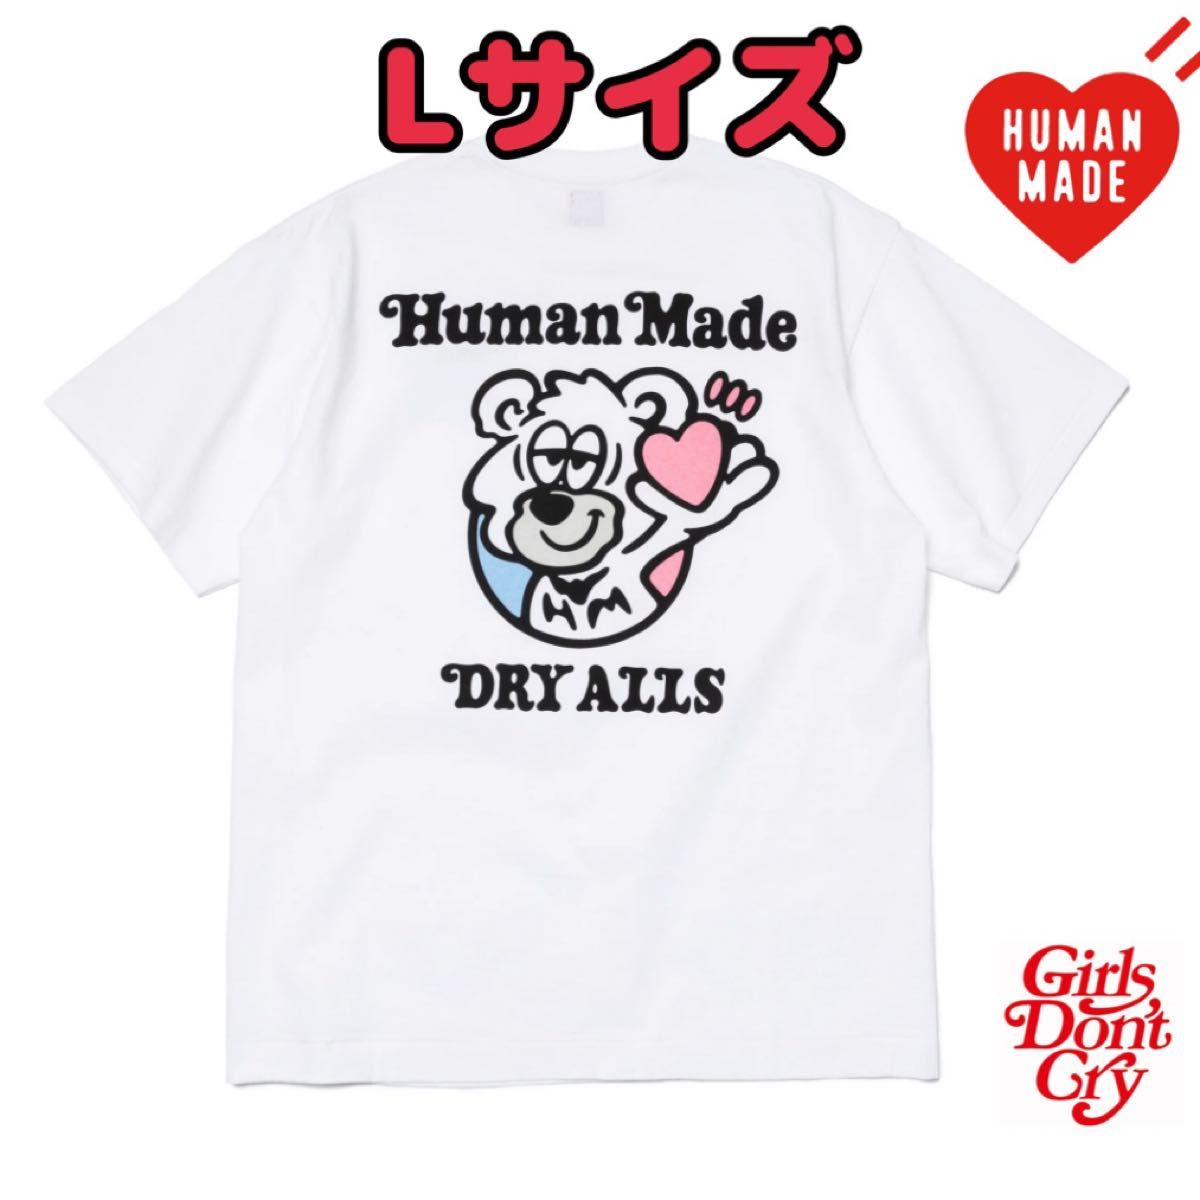 HUMANMADE GDC GRAPHIC T-SHIRT #1 White size L｜PayPayフリマ